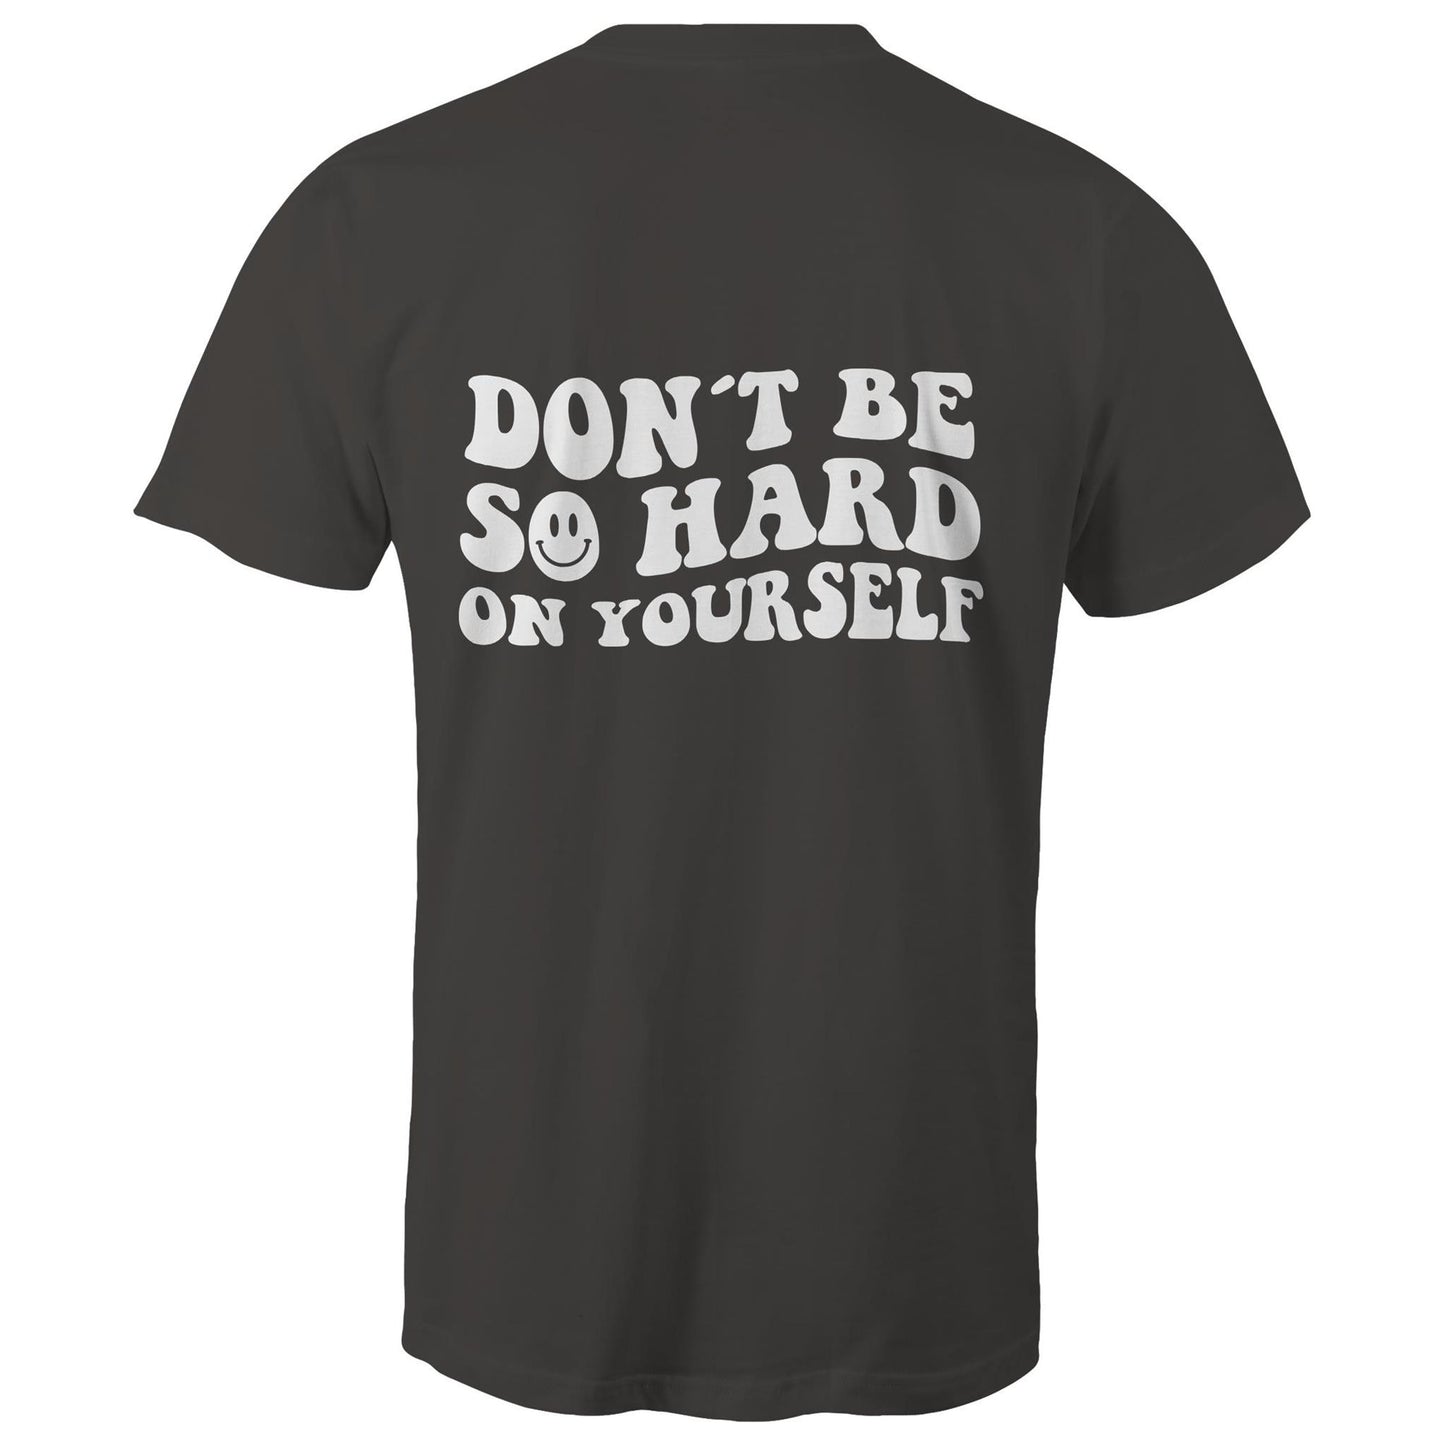 Mens T-Shirt - Dont Be So Hard On Yourself